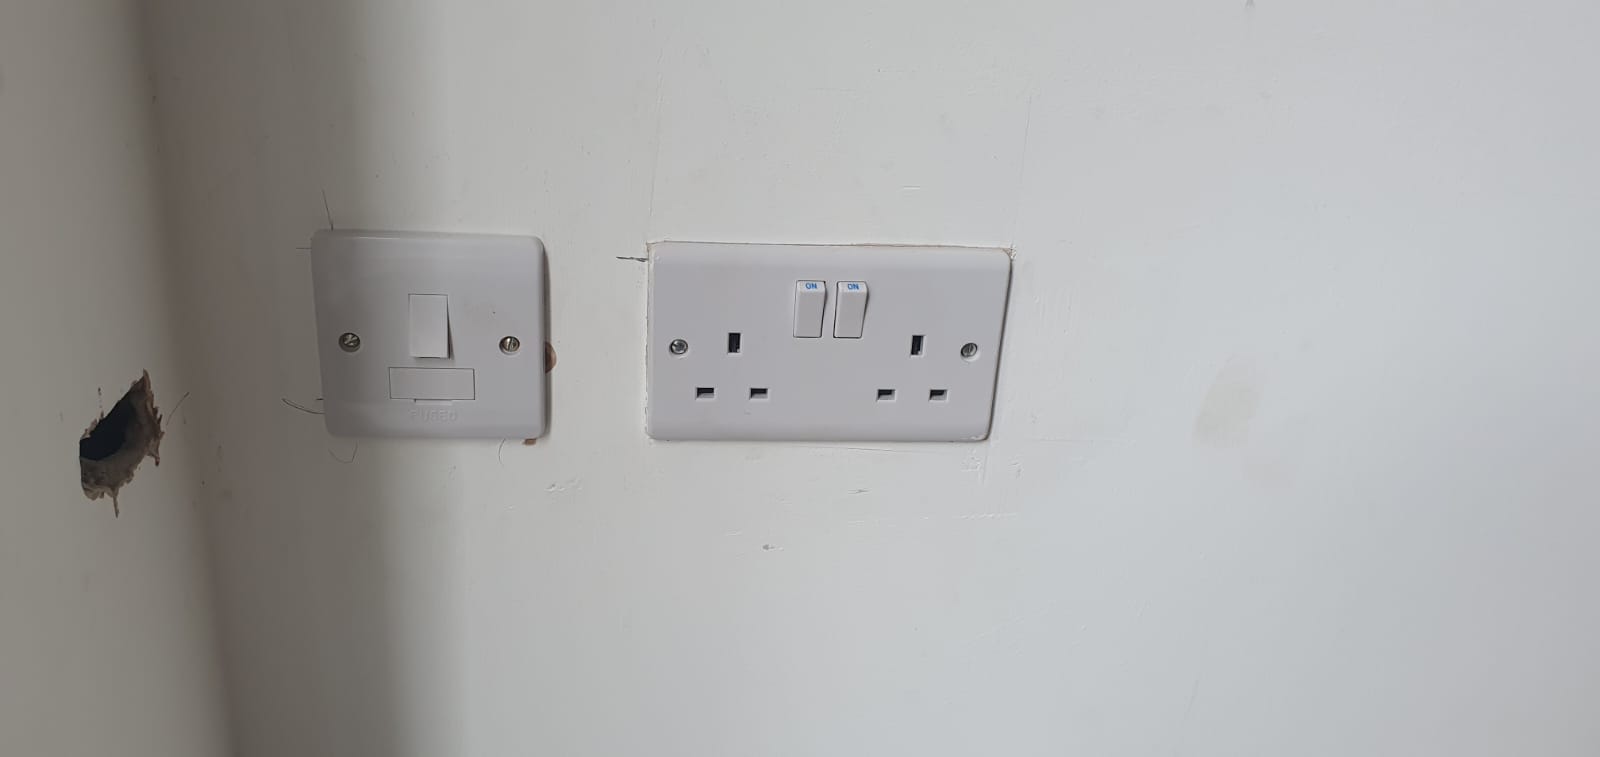 A socket is on the wall, first a single and then a double next to it